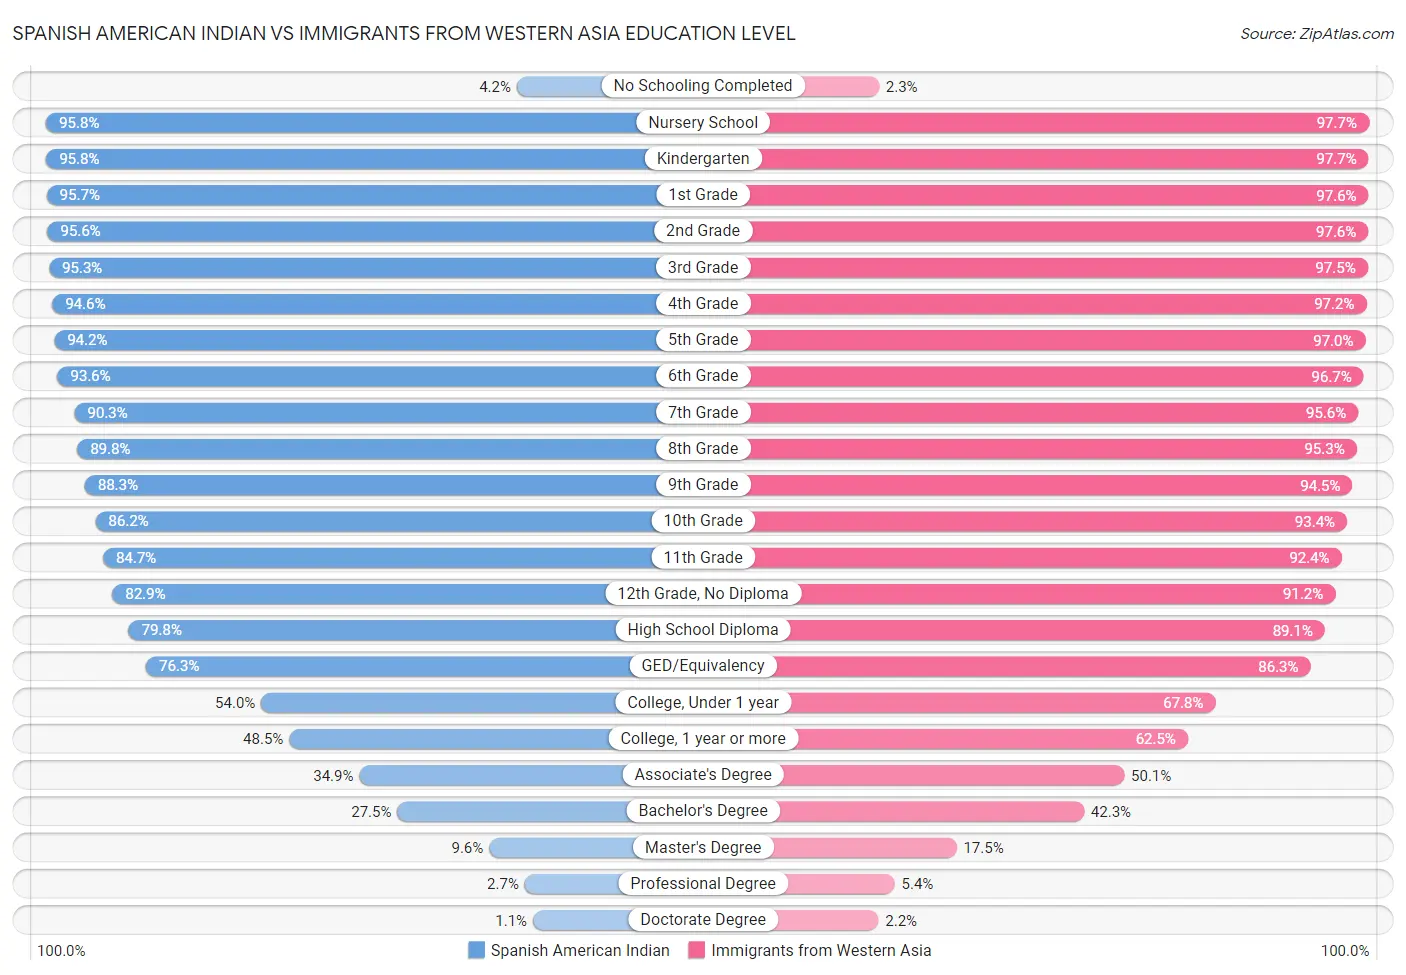 Spanish American Indian vs Immigrants from Western Asia Education Level